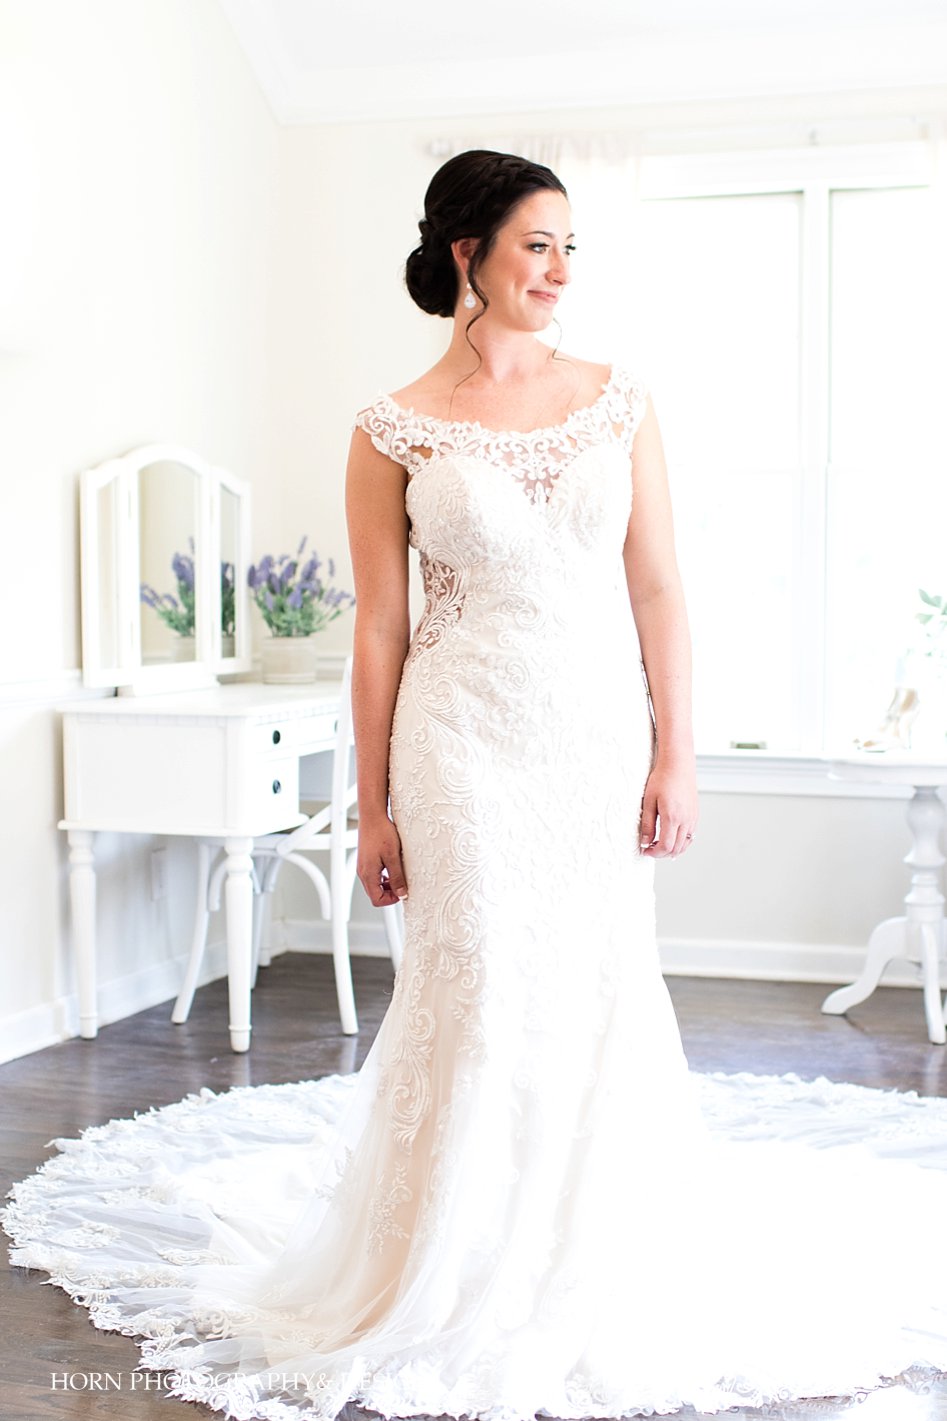 Little River Farms Wedding: Brittany + Zach » Horn Photography and ...